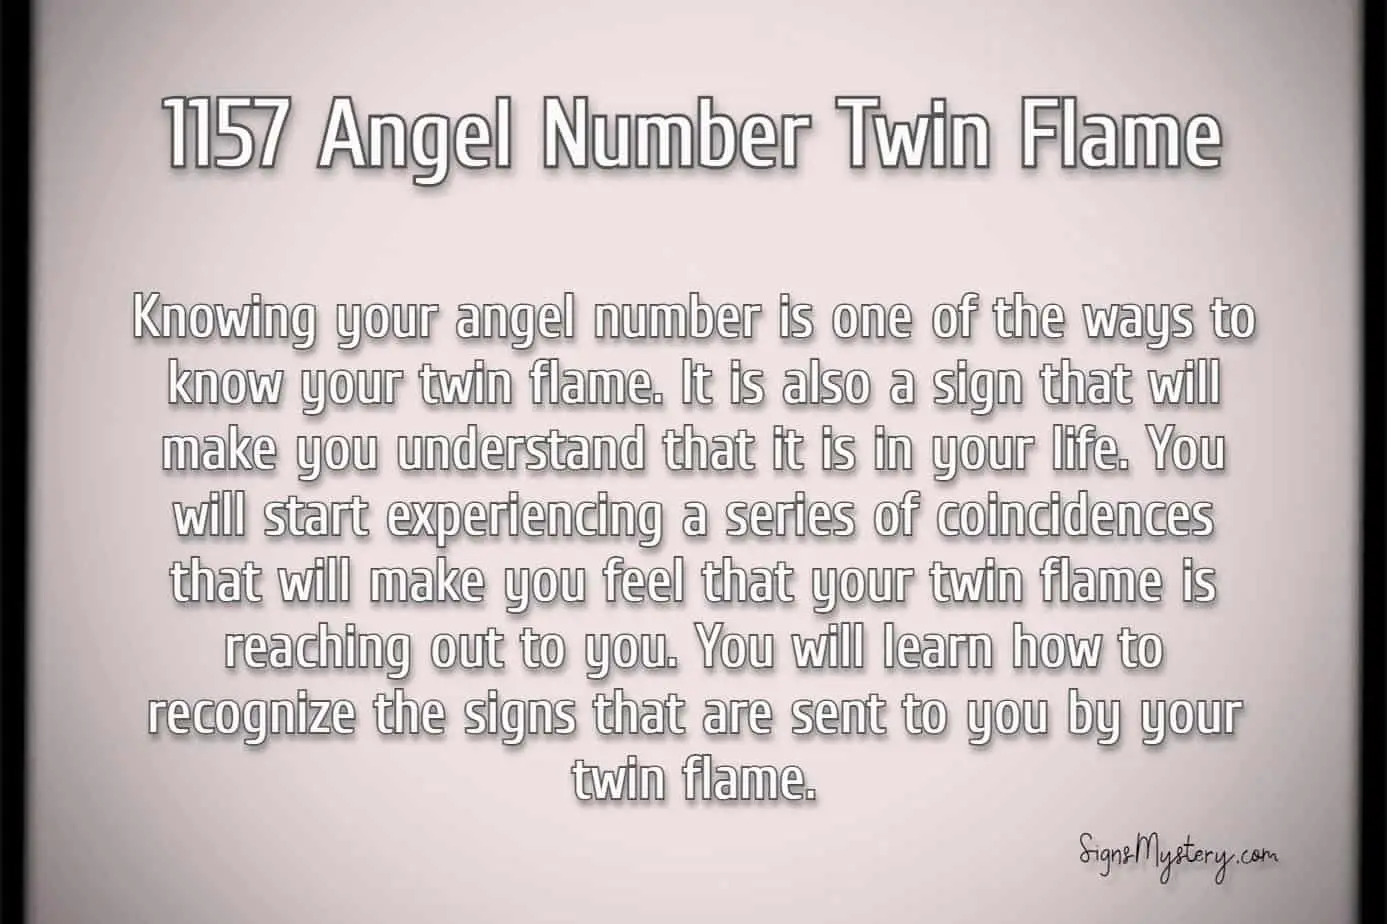 1157 angel number twin flame